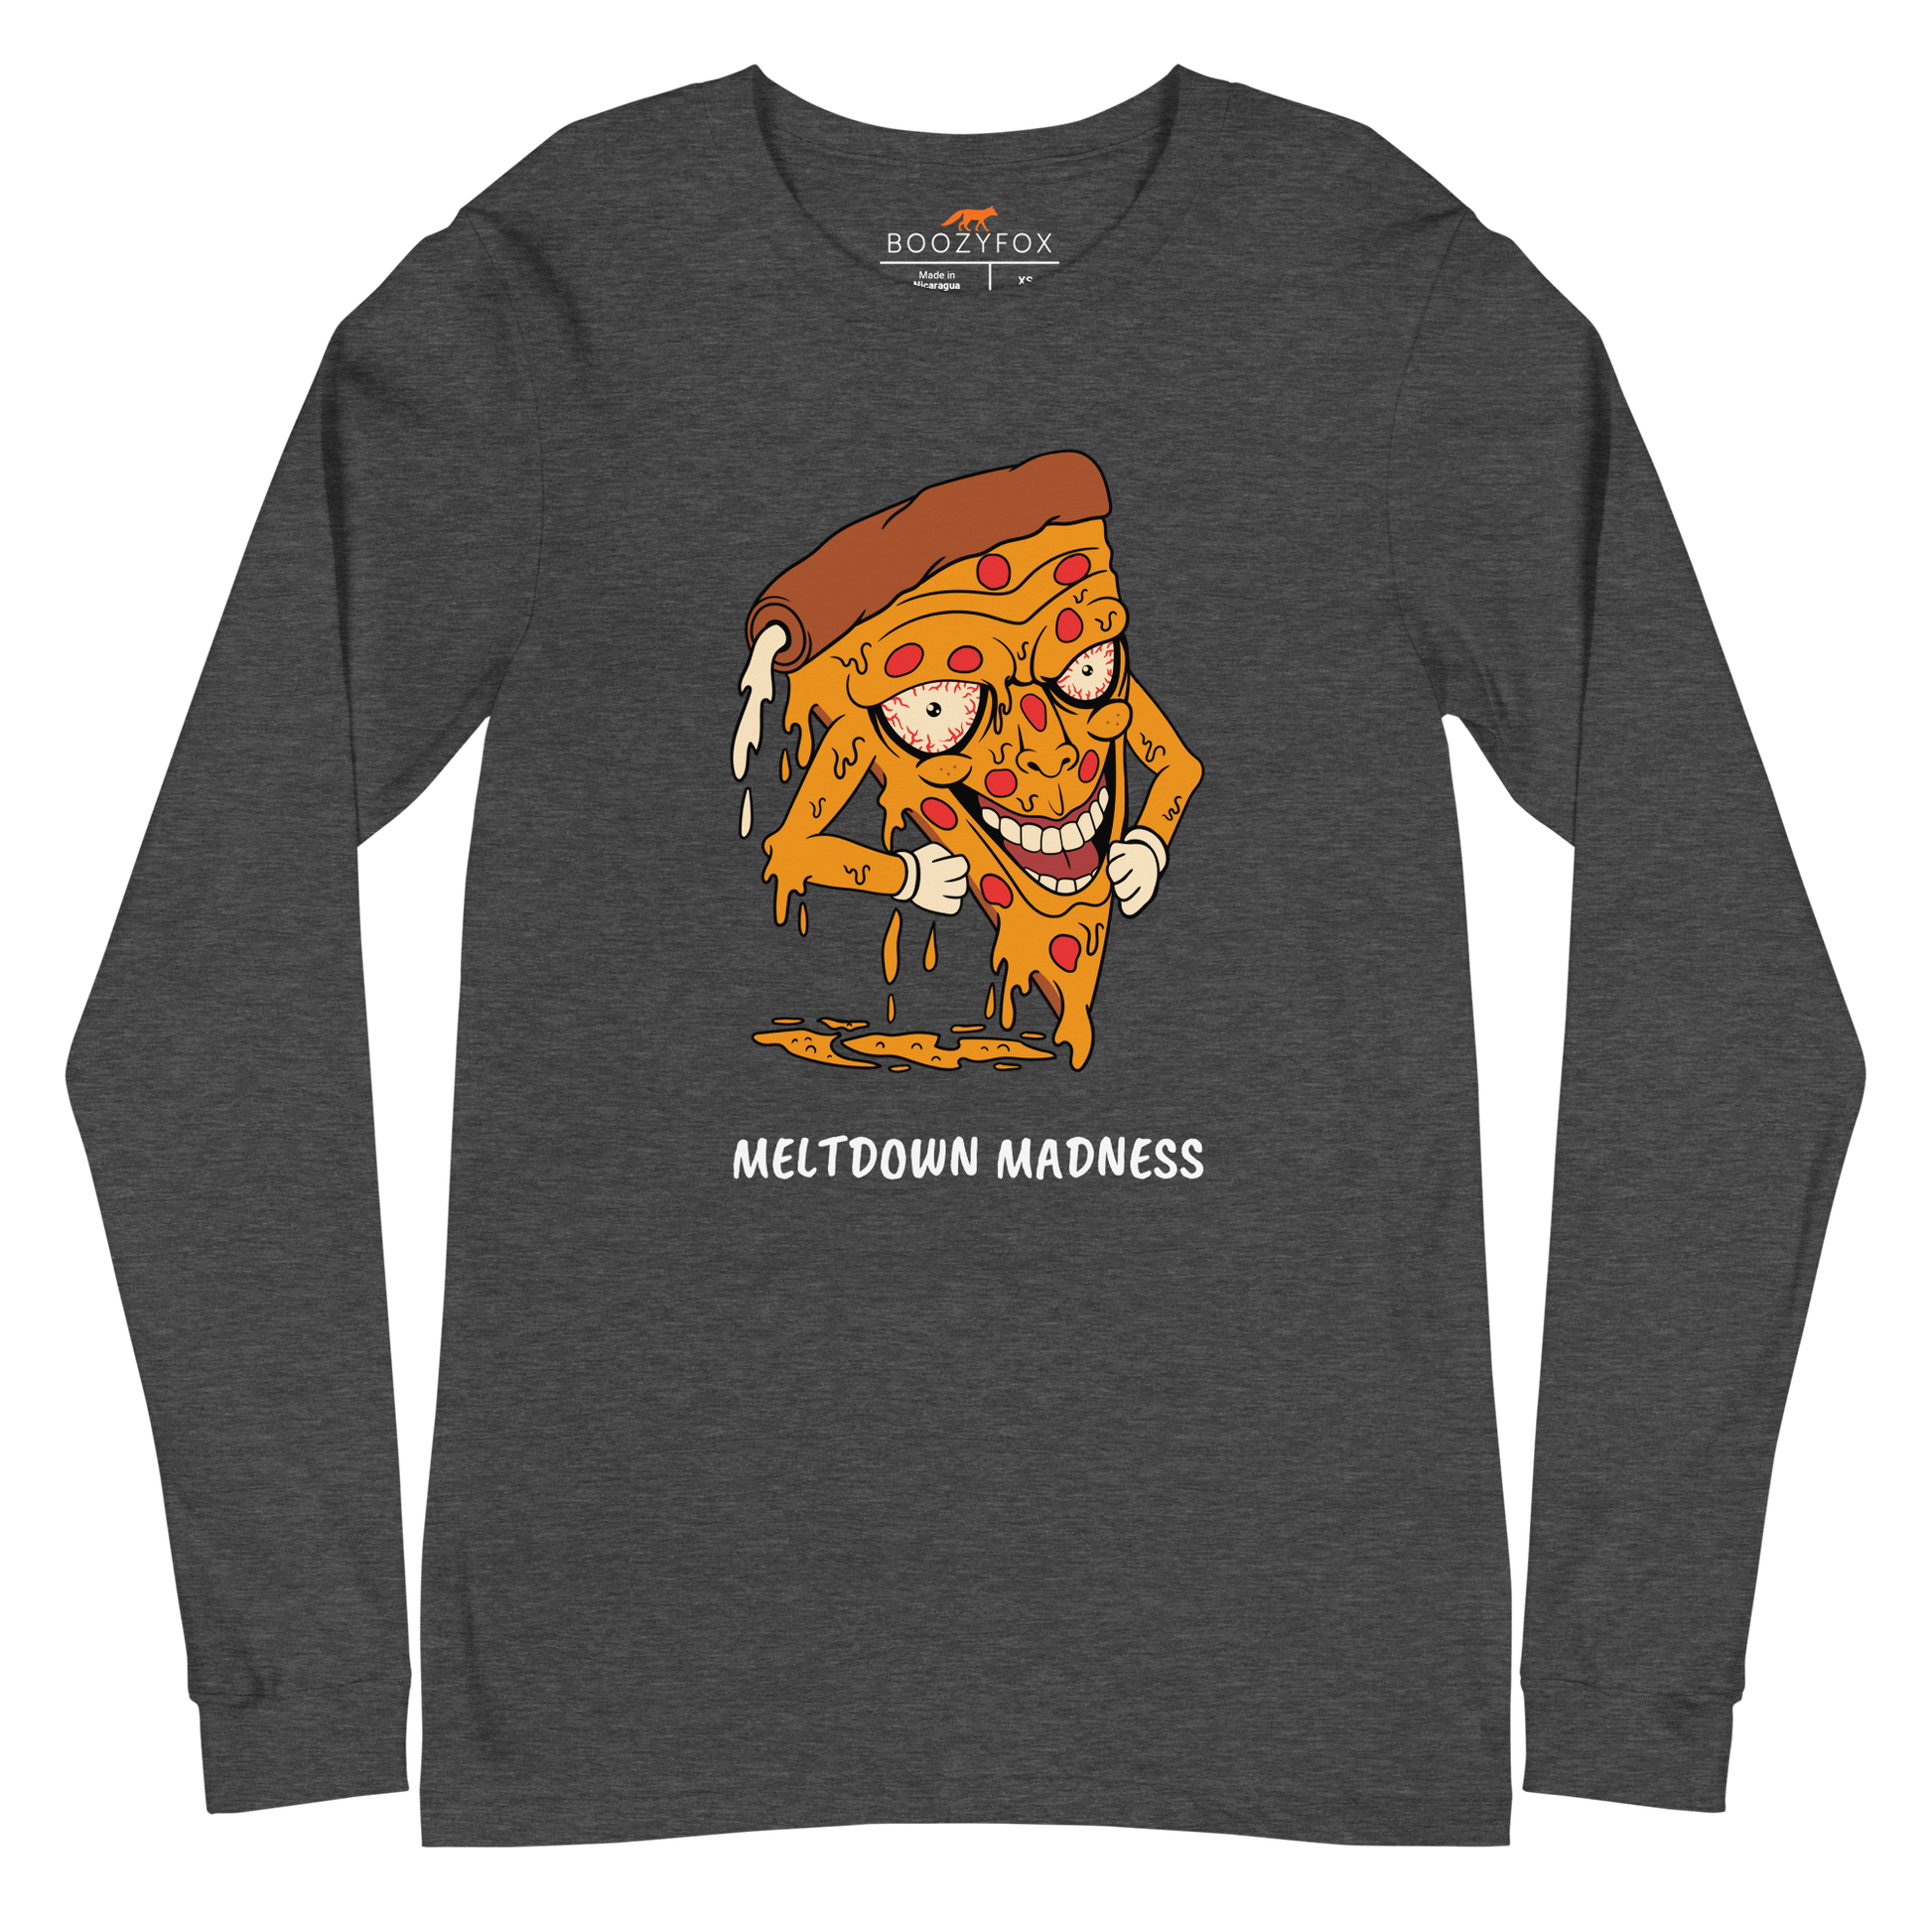 Dark Grey Heather Melting Pizza Long Sleeve Tee featuring a Meltdown Madness graphic on the chest - Funny Pizza Long Sleeve Graphic Tees - Boozy Fox